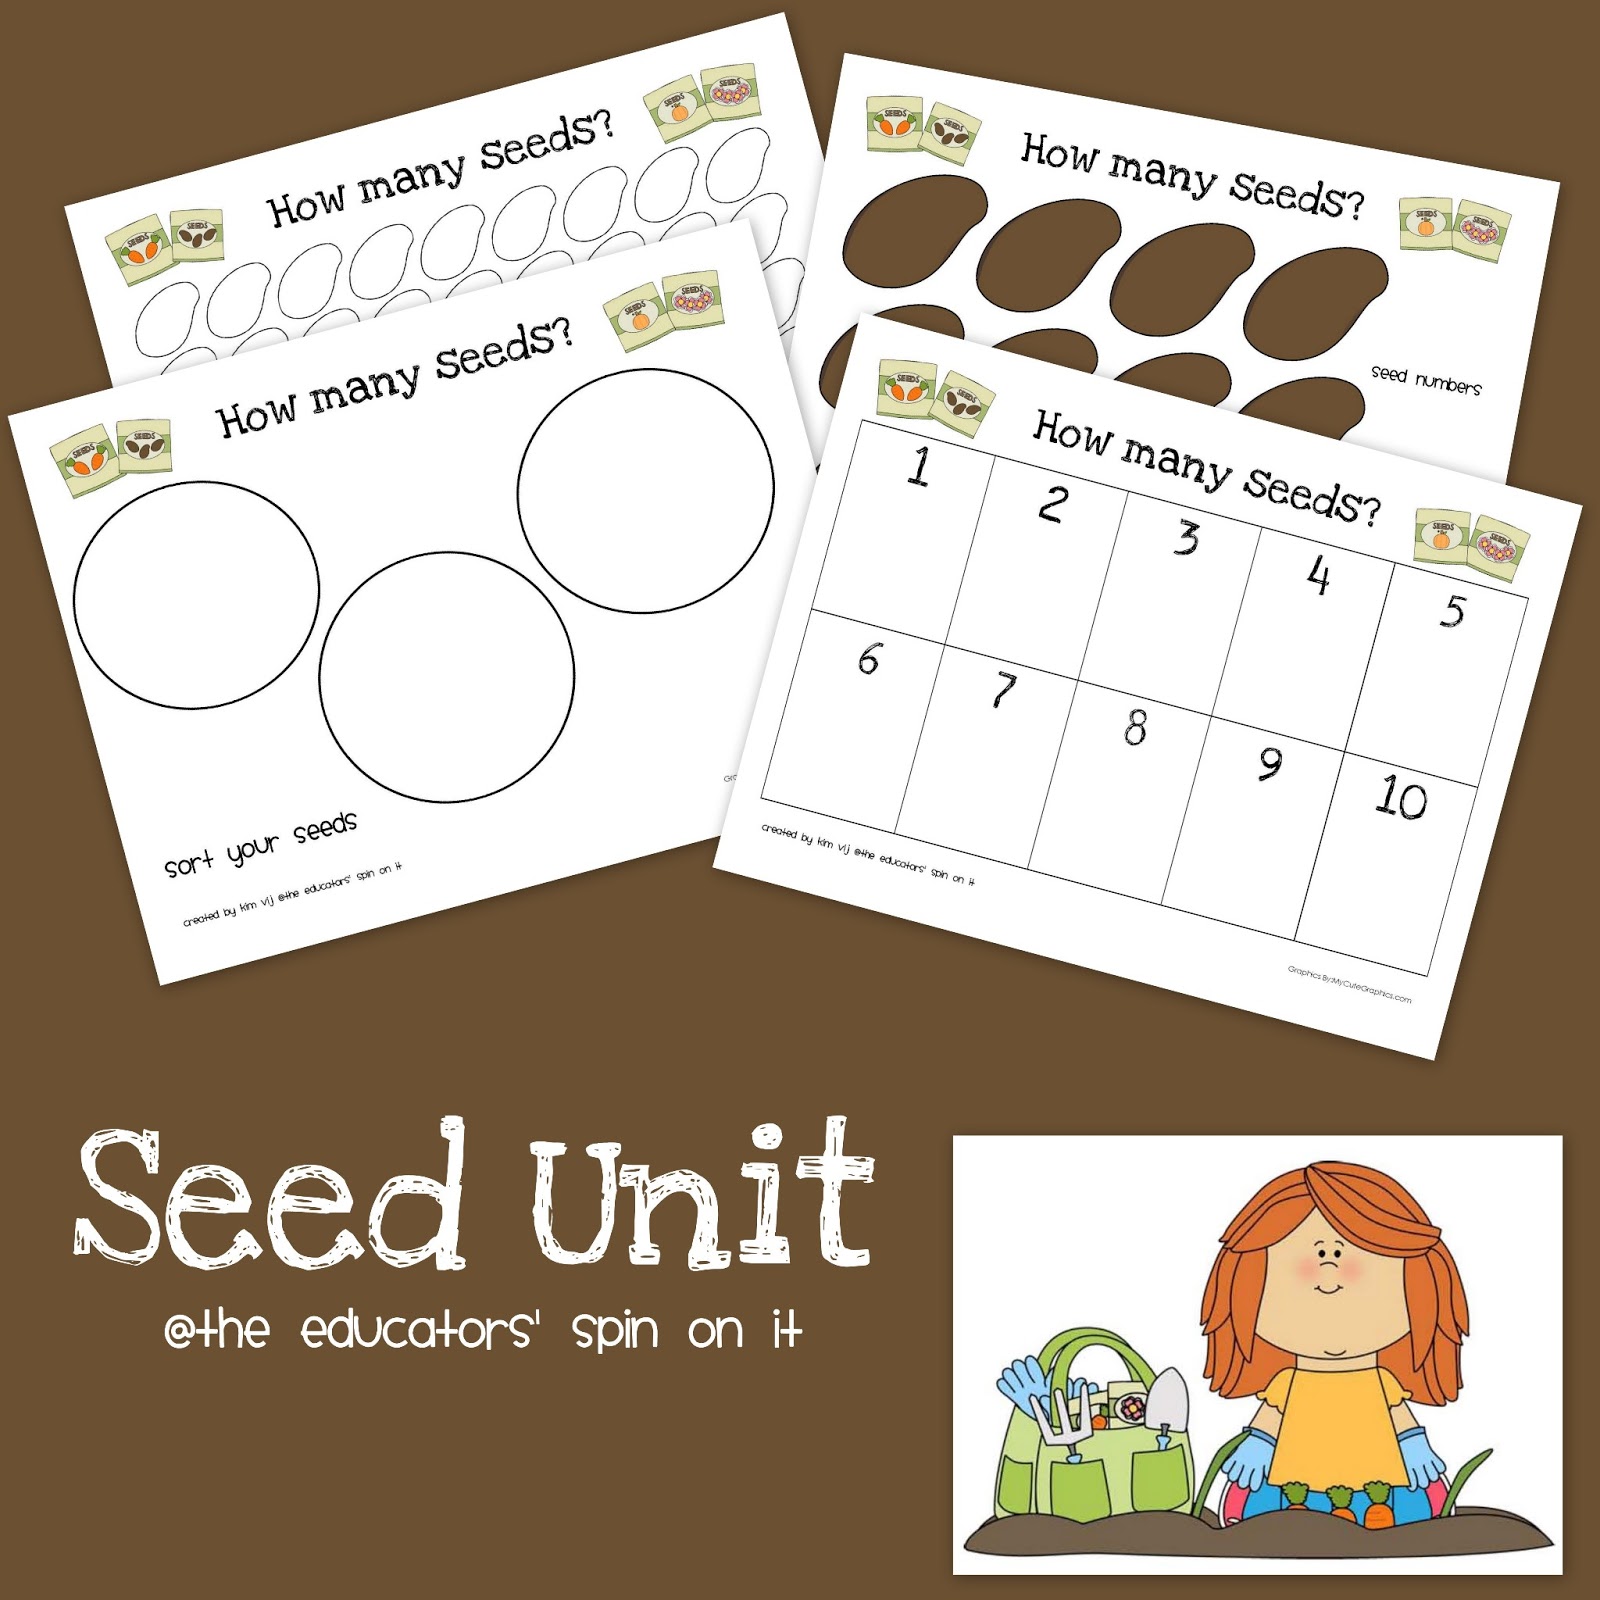 Printable Seed Activities Inspired by The Tiny Seed by Eric Carle The